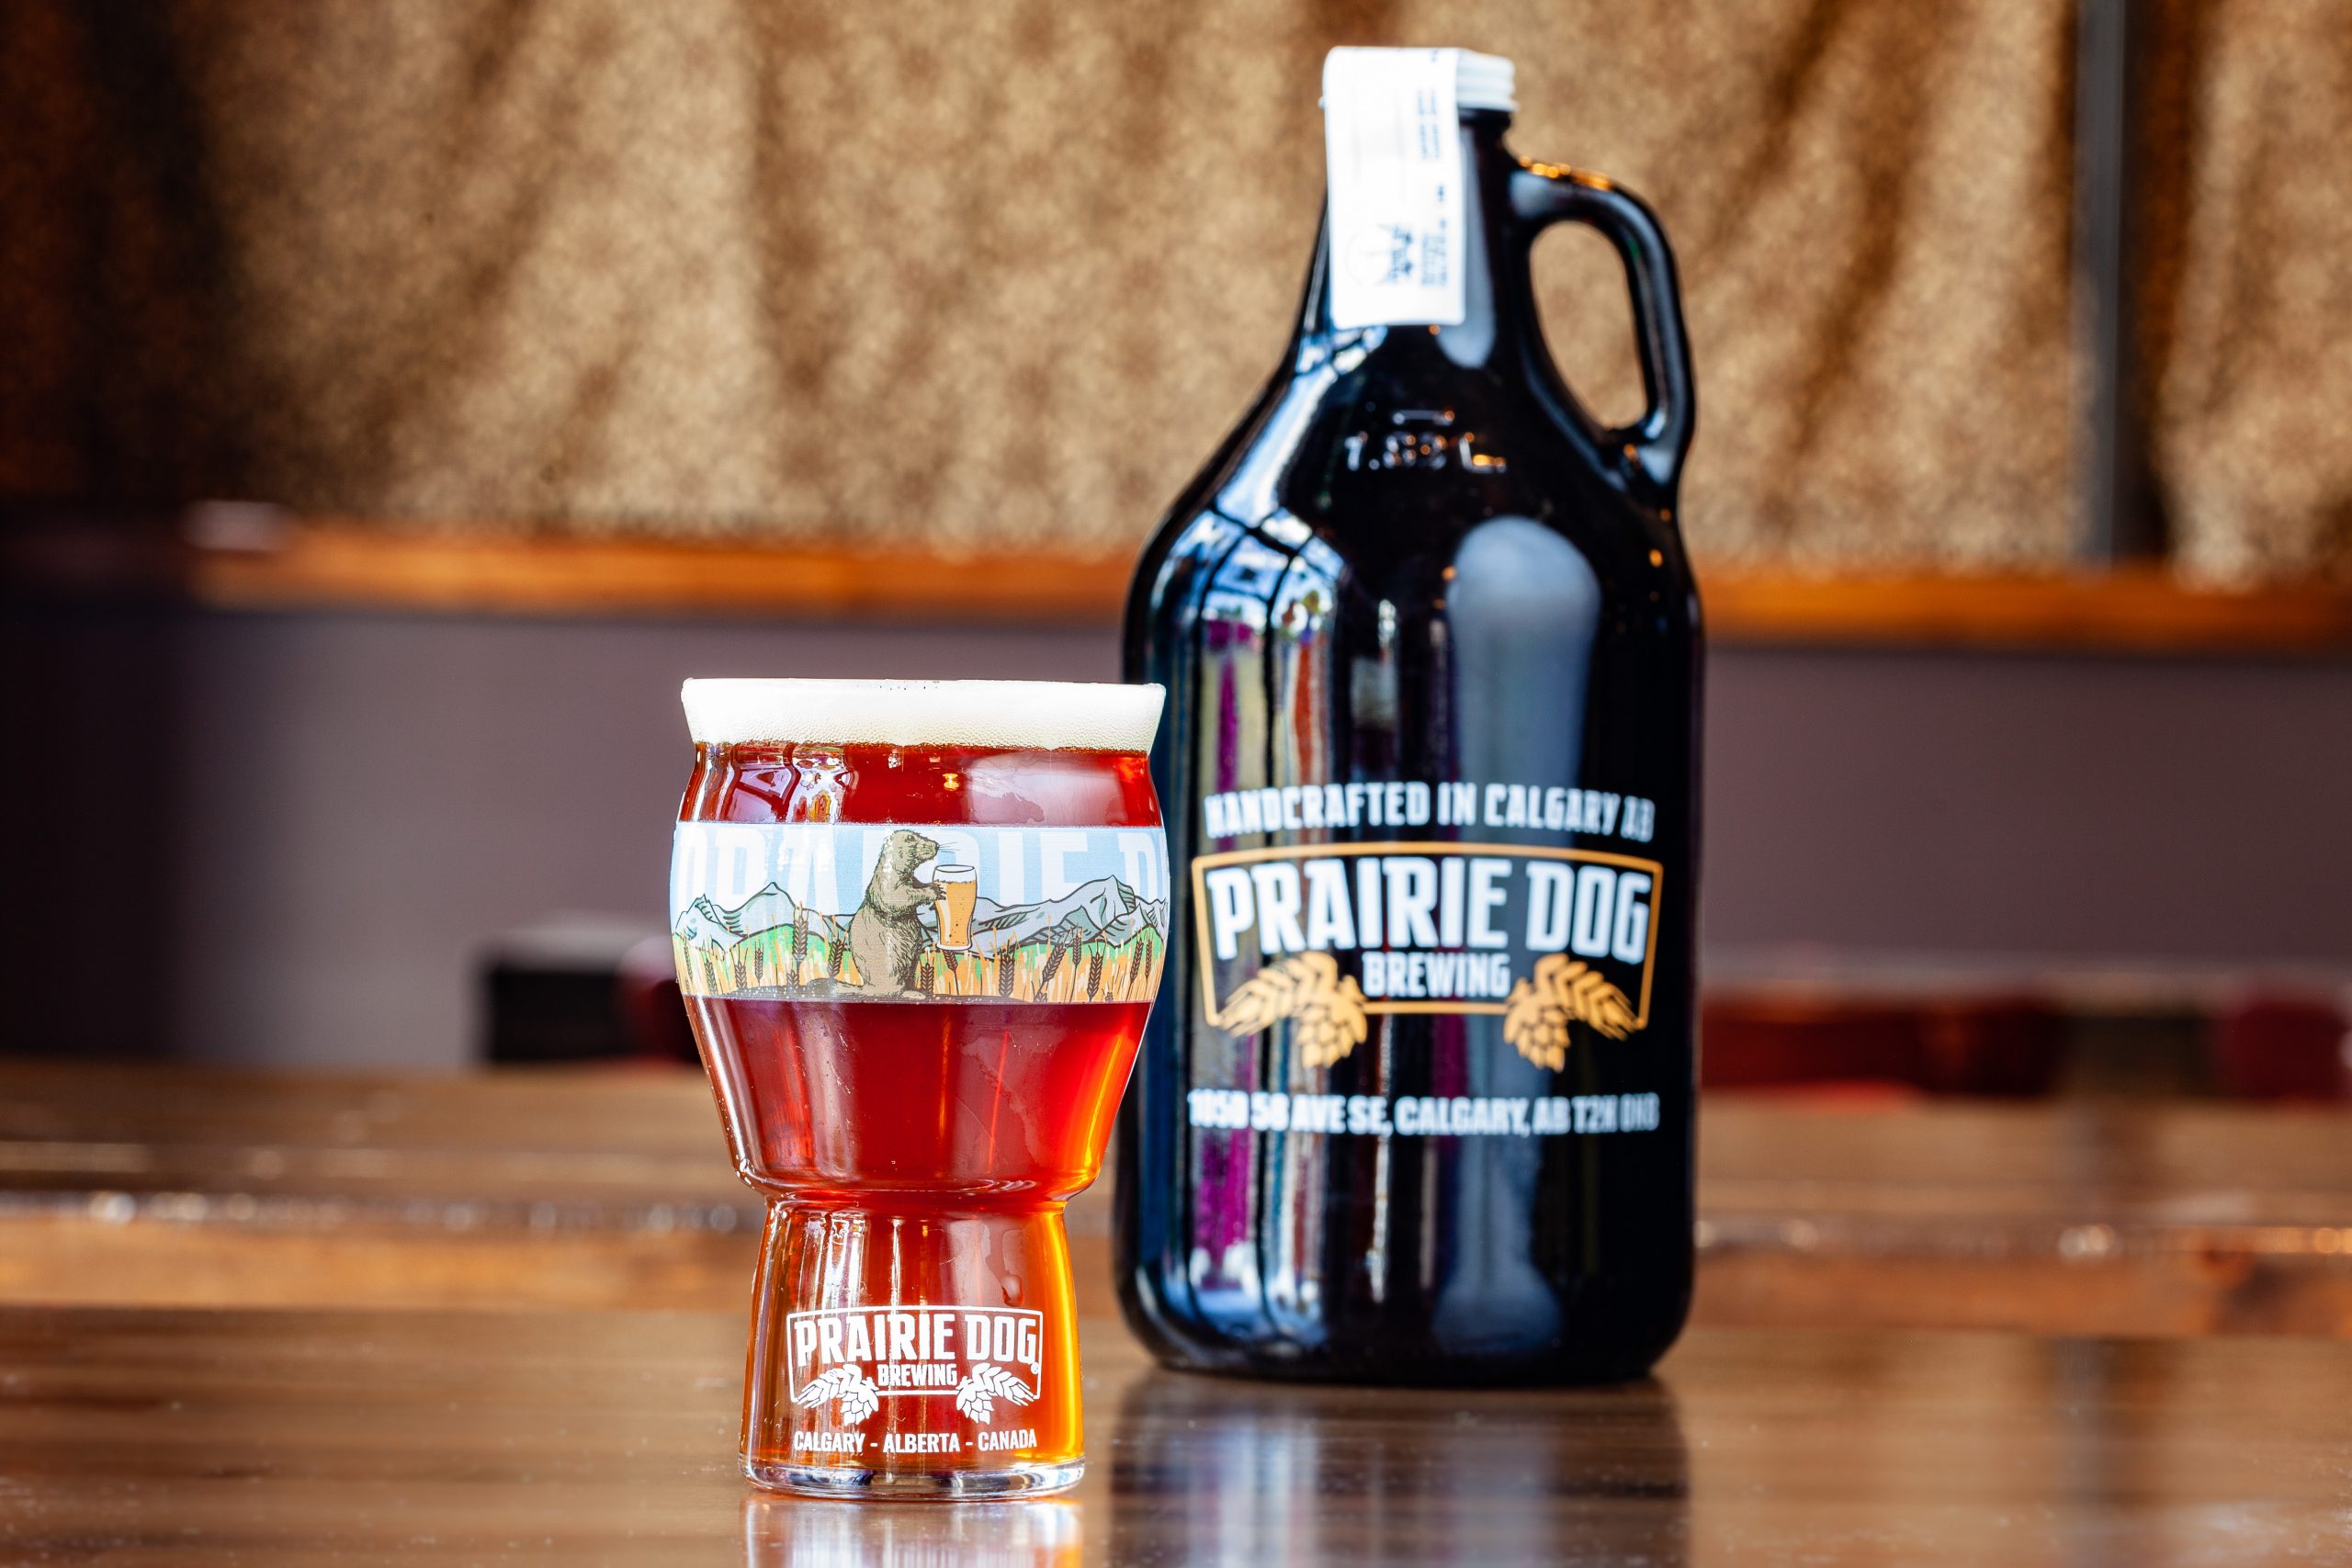 Prairie Dog Brewing's Alby the Elder Double IPA (DIPA) in a branded 16-oz US pint glass with a 64-oz branded growler in the background.